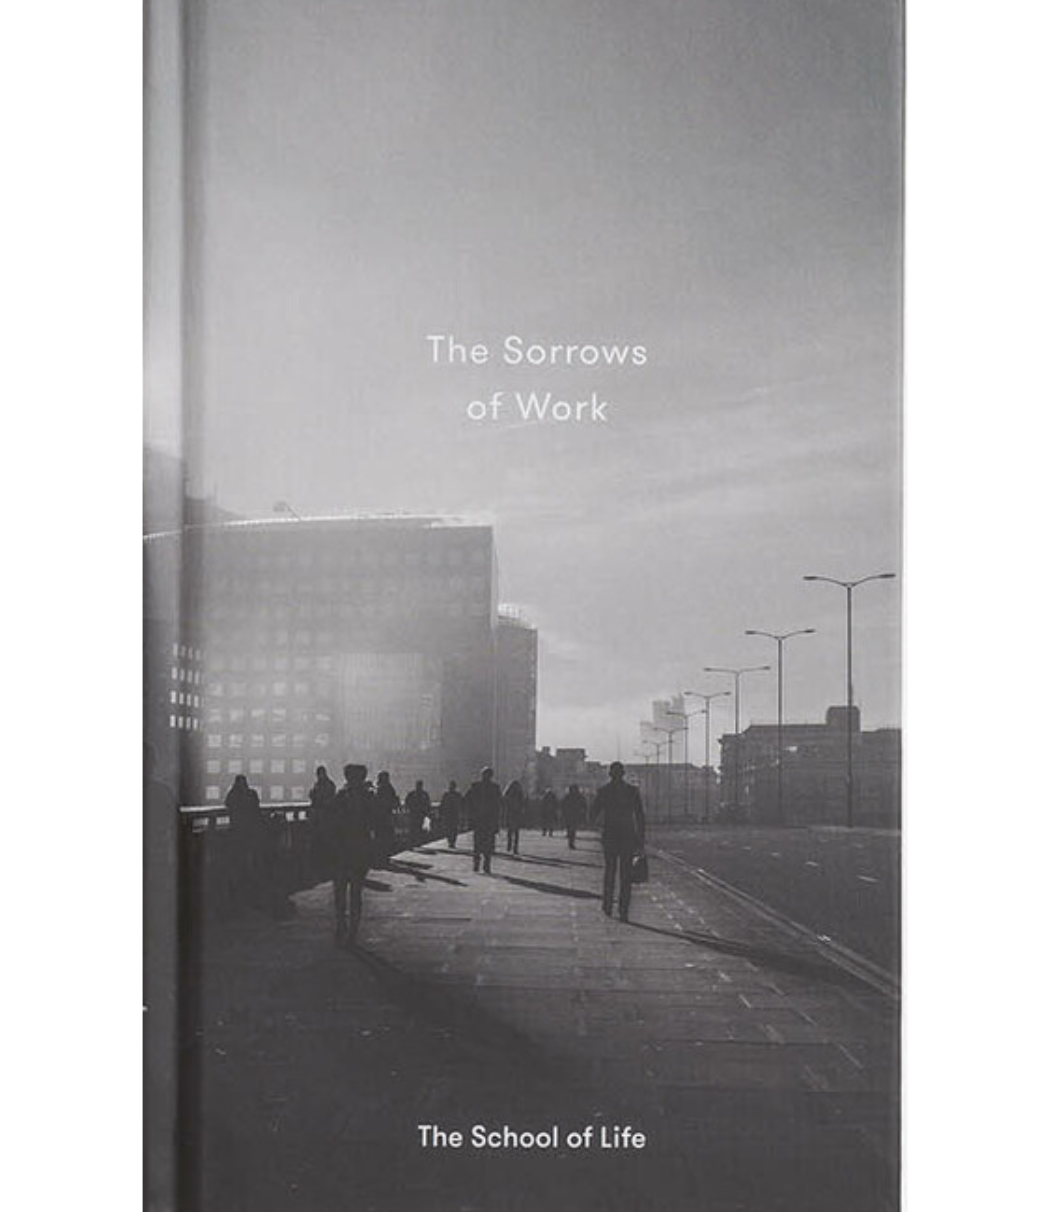 The School of Life Press: The Sorrows Of Work